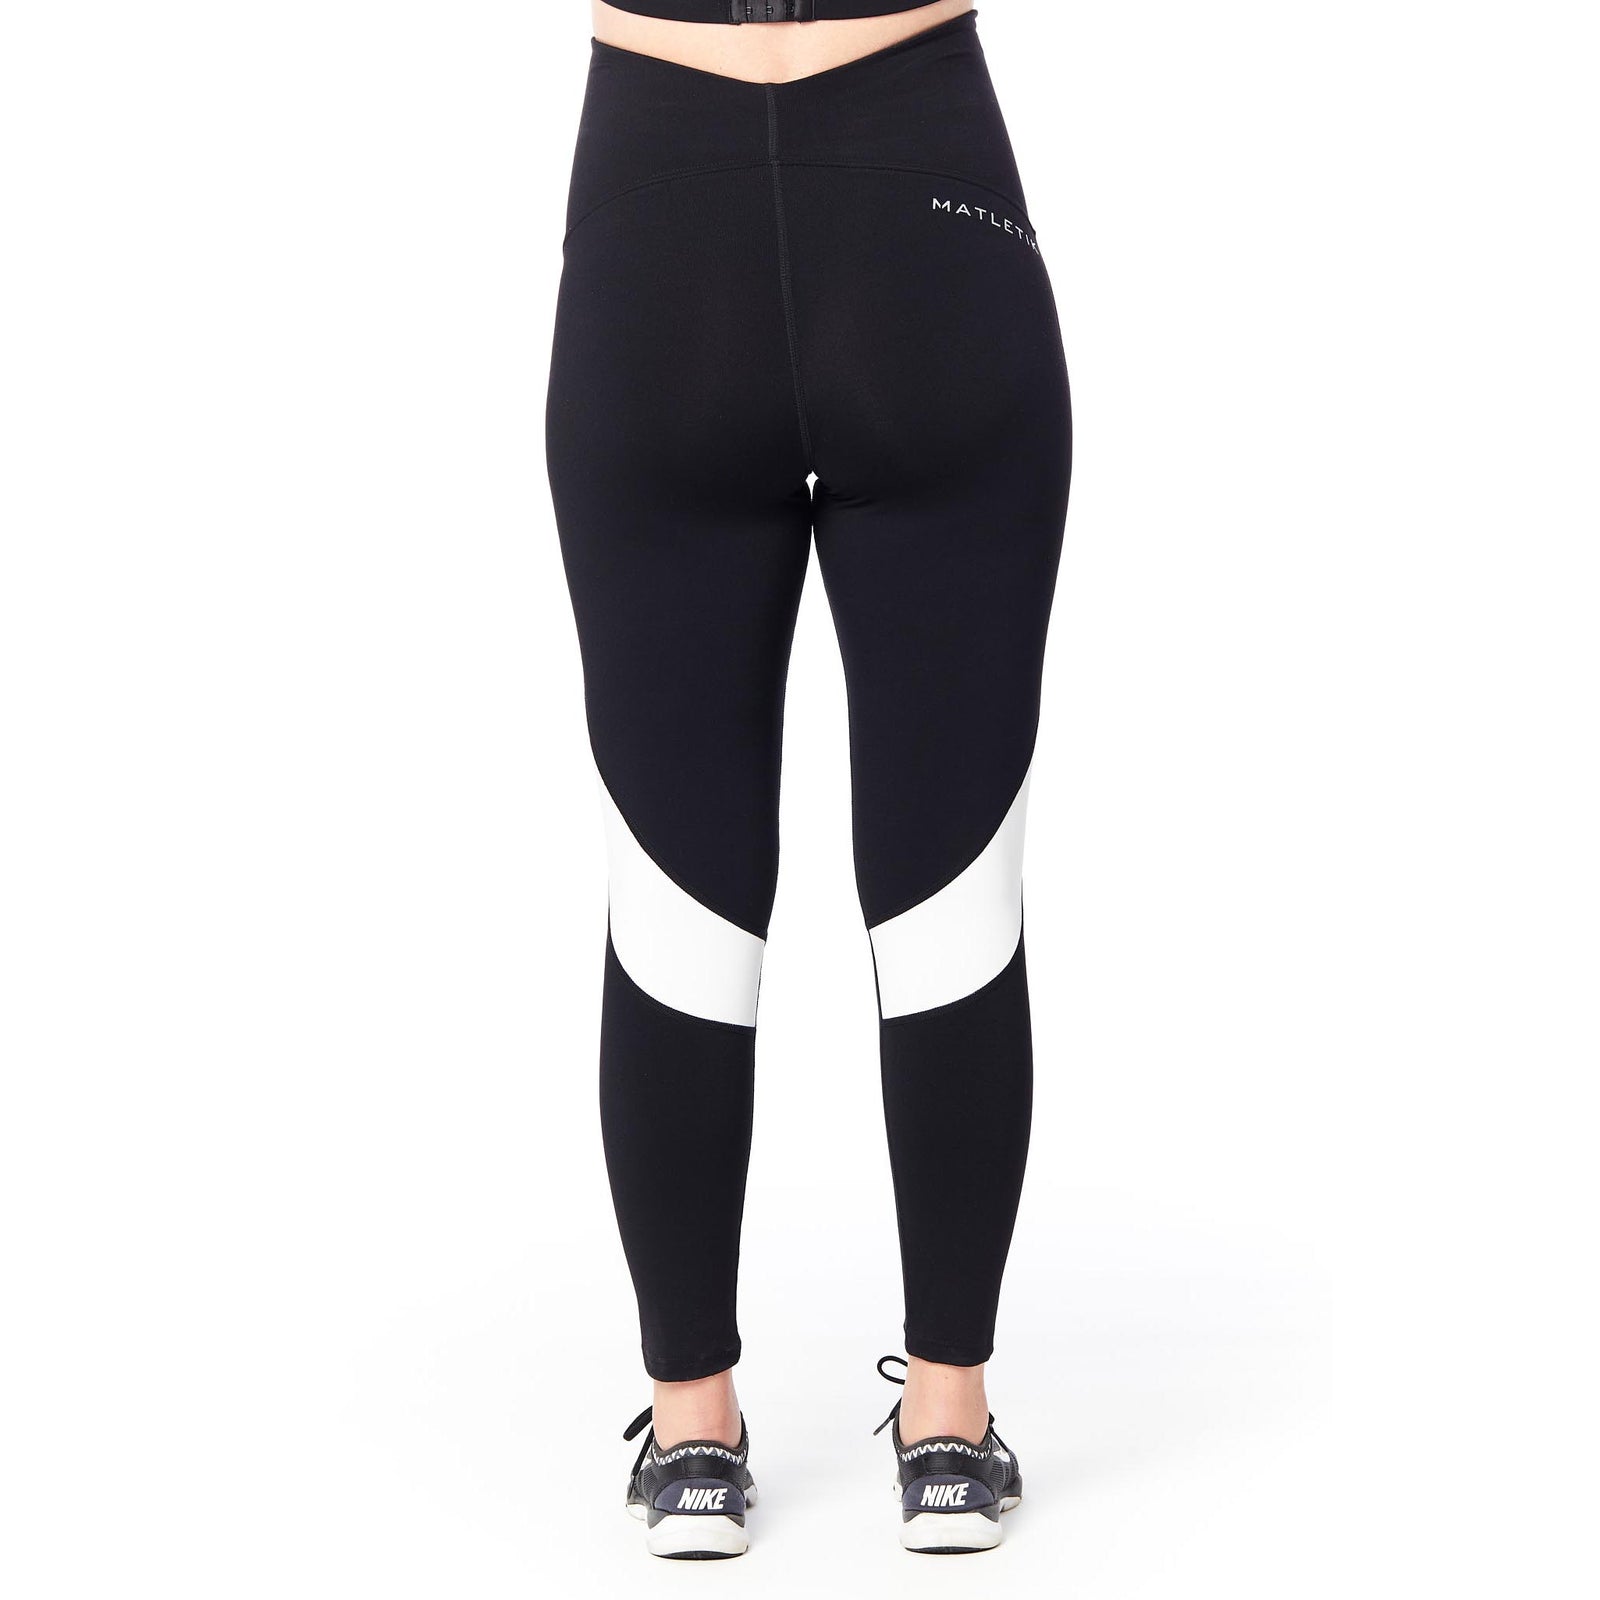 COURAGE Ankle length legging with fold over panel